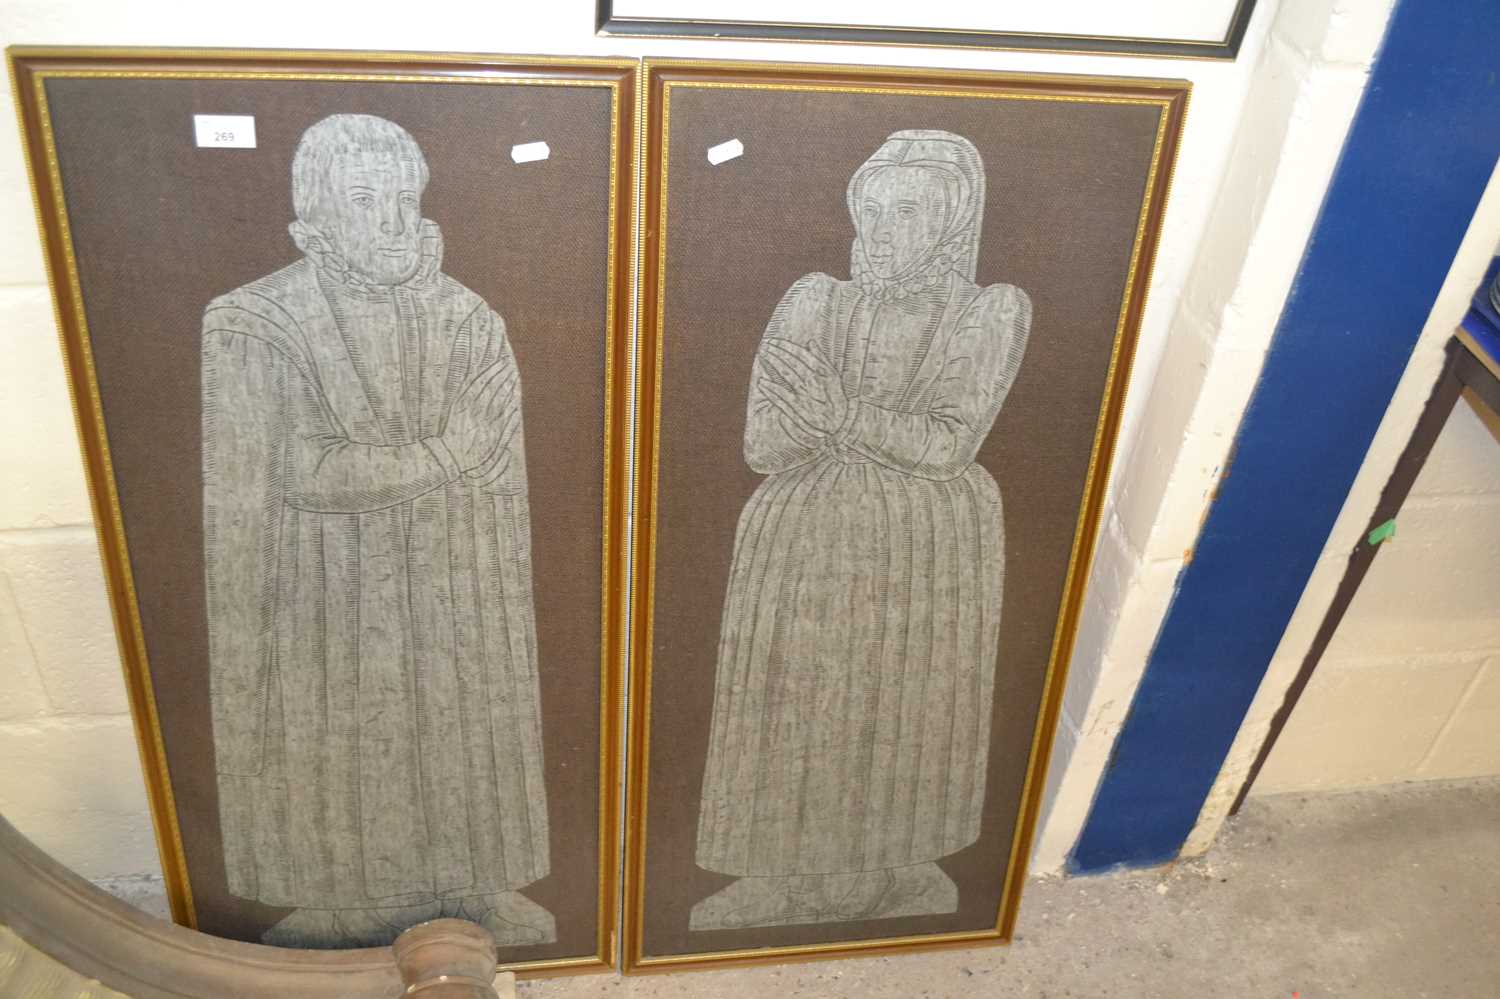 Pair of brass rubbing type pictures, medieval lady and gent